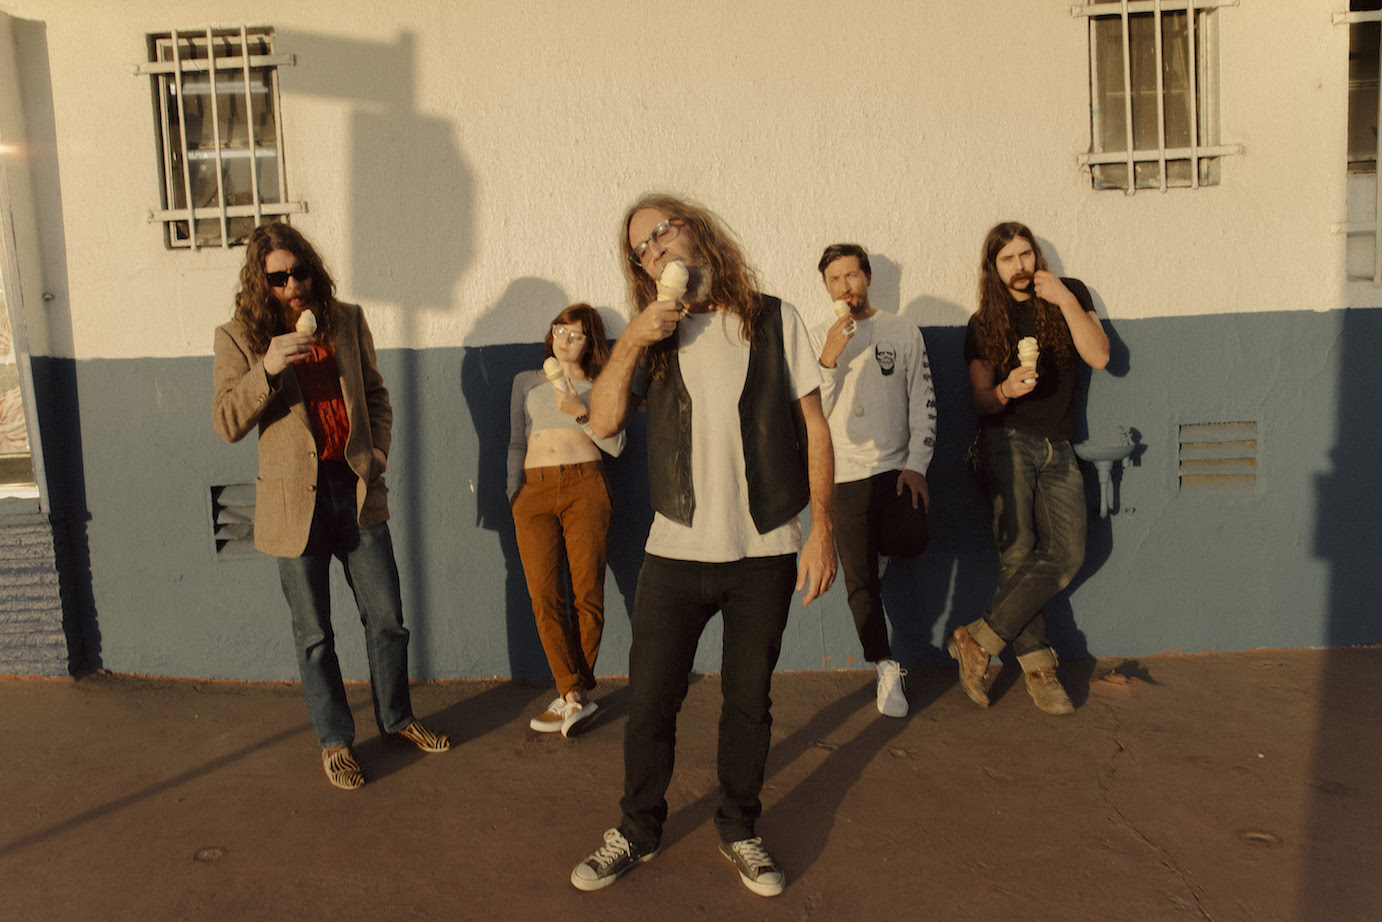 "Boogie Lover" by Black Mountain is Northern Transmissions' 'Song of the Day'